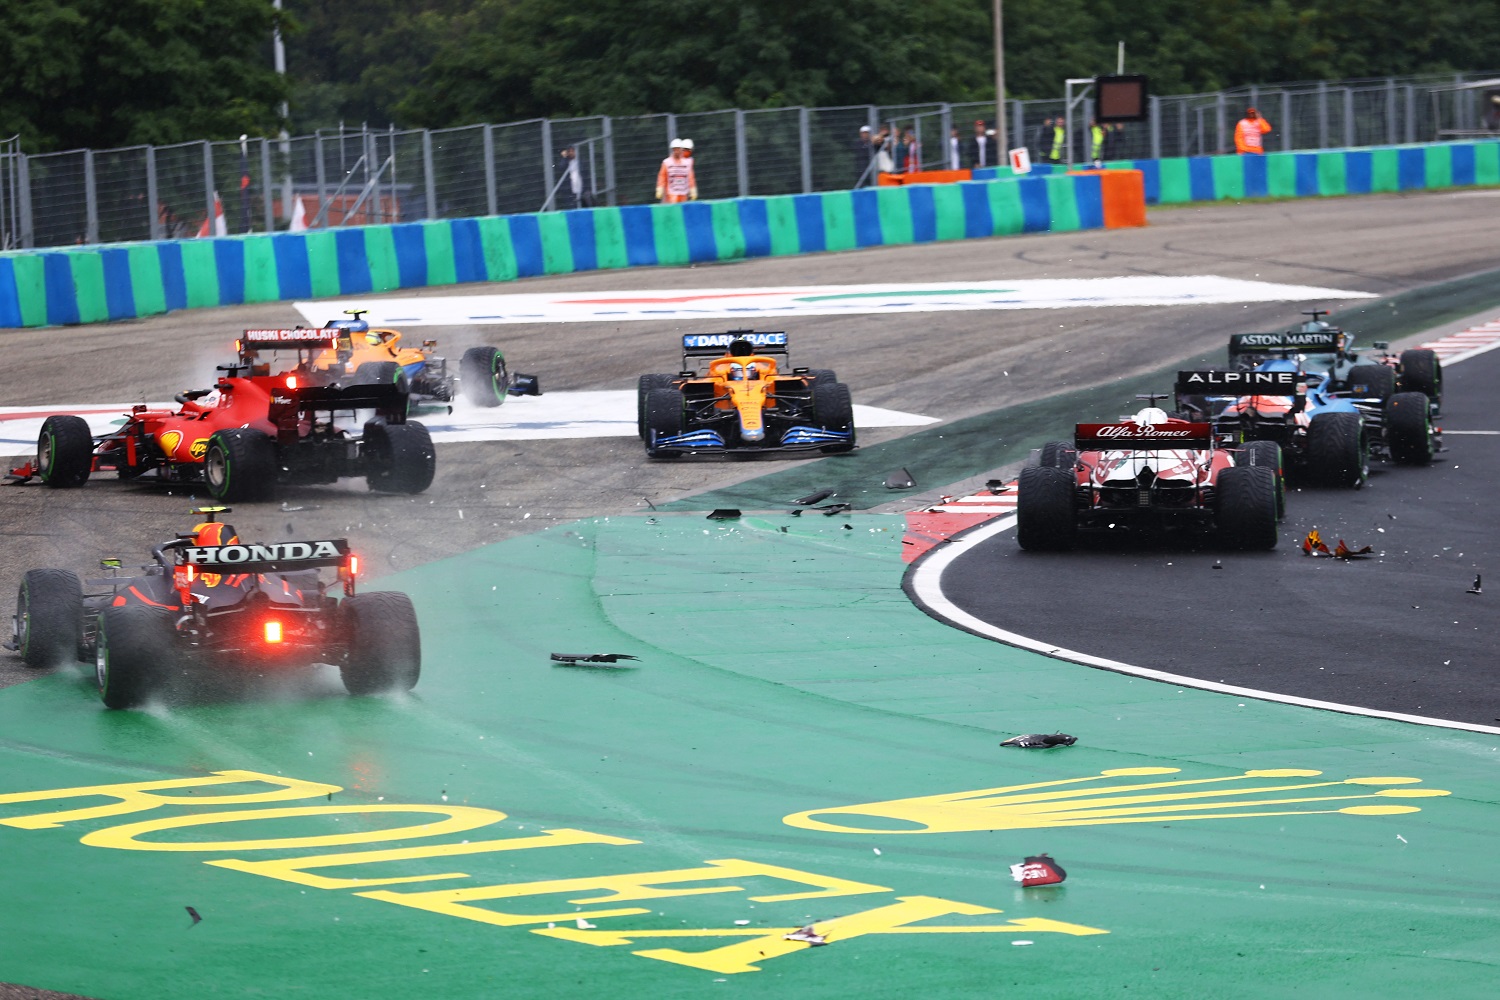 A view of the crash at the start during the F1 Grand Prix of Hungary at Hungaroring on August 1, 2021.